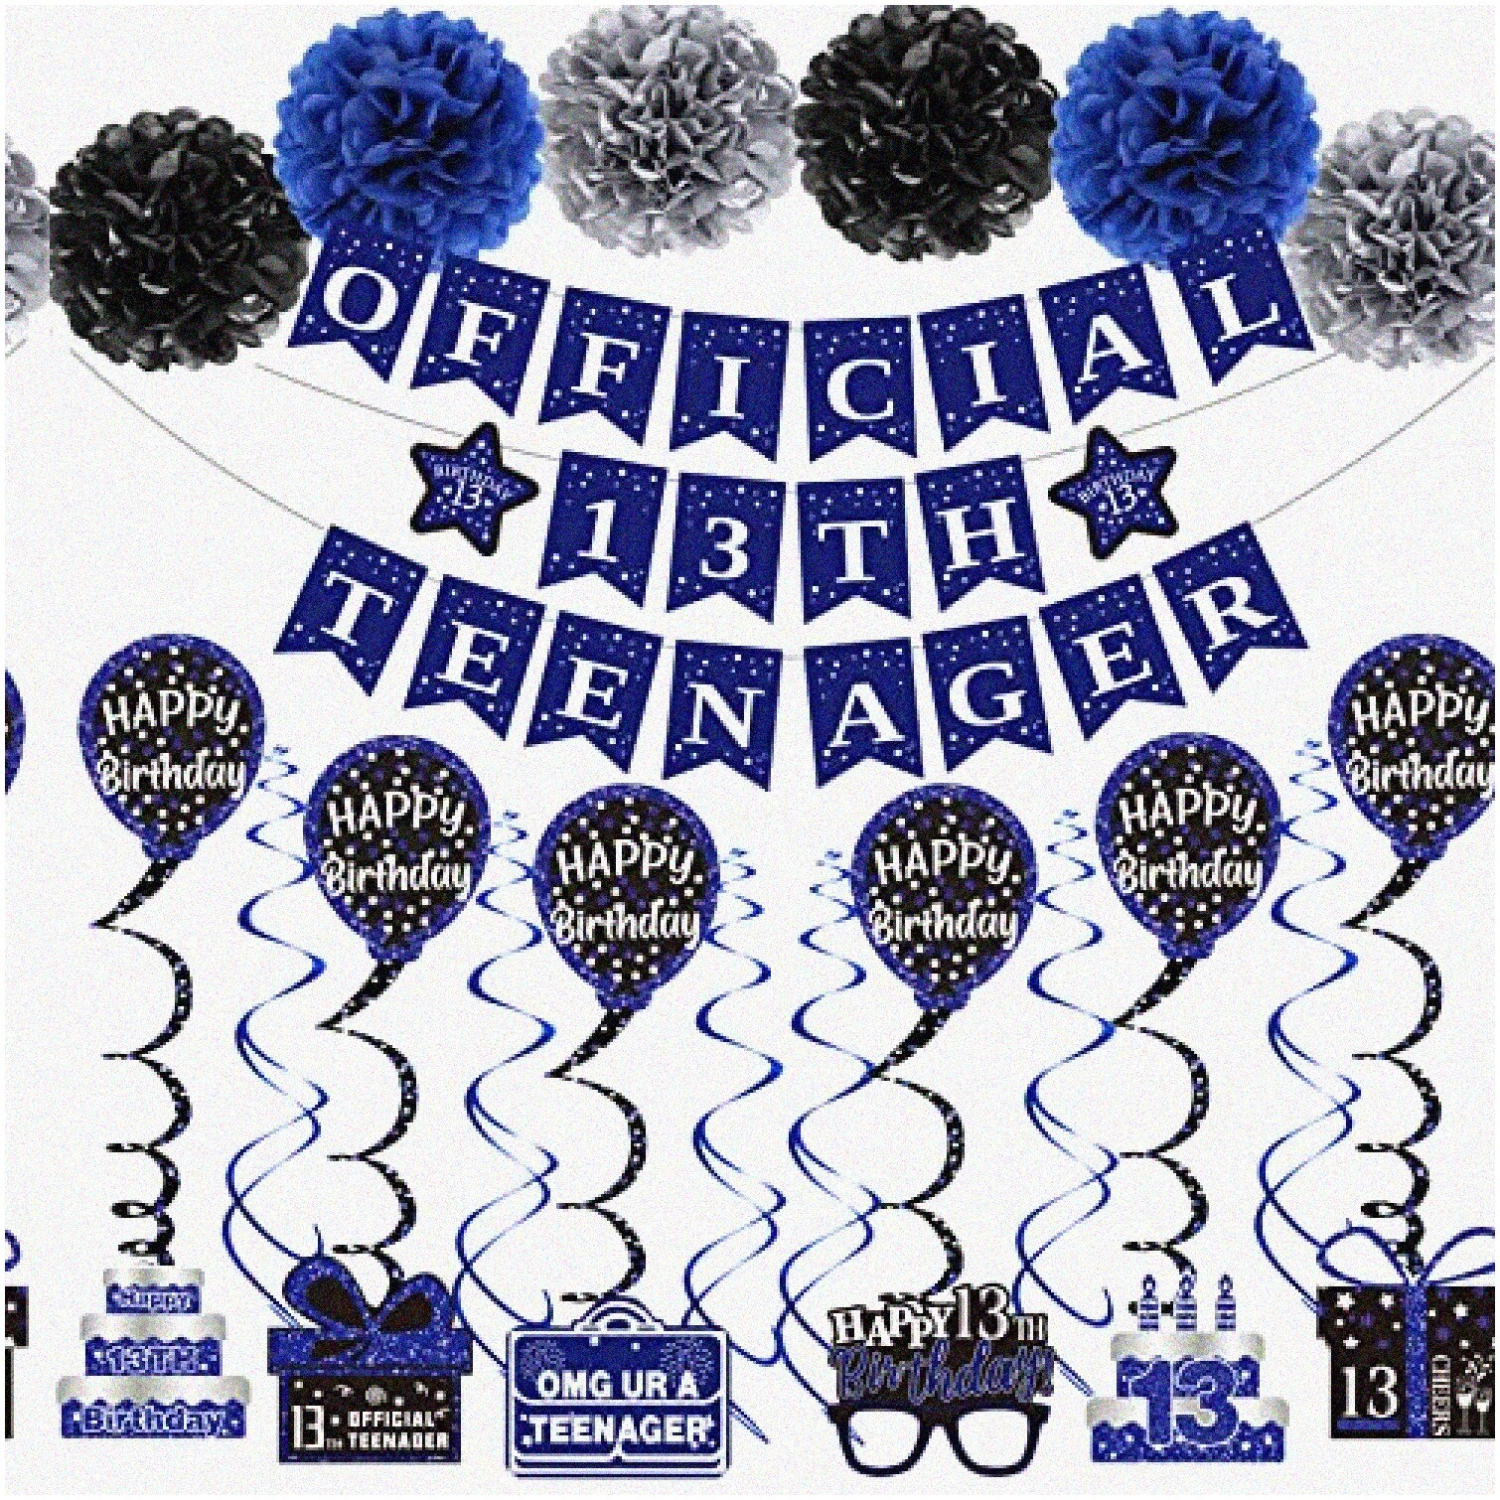 Teenage Bliss: Blue 13th Birthday Party Kit - Official Decorations, Double-Sided Card, Pompoms, Hanging Swirls - Celebrate 13 Years with Style!